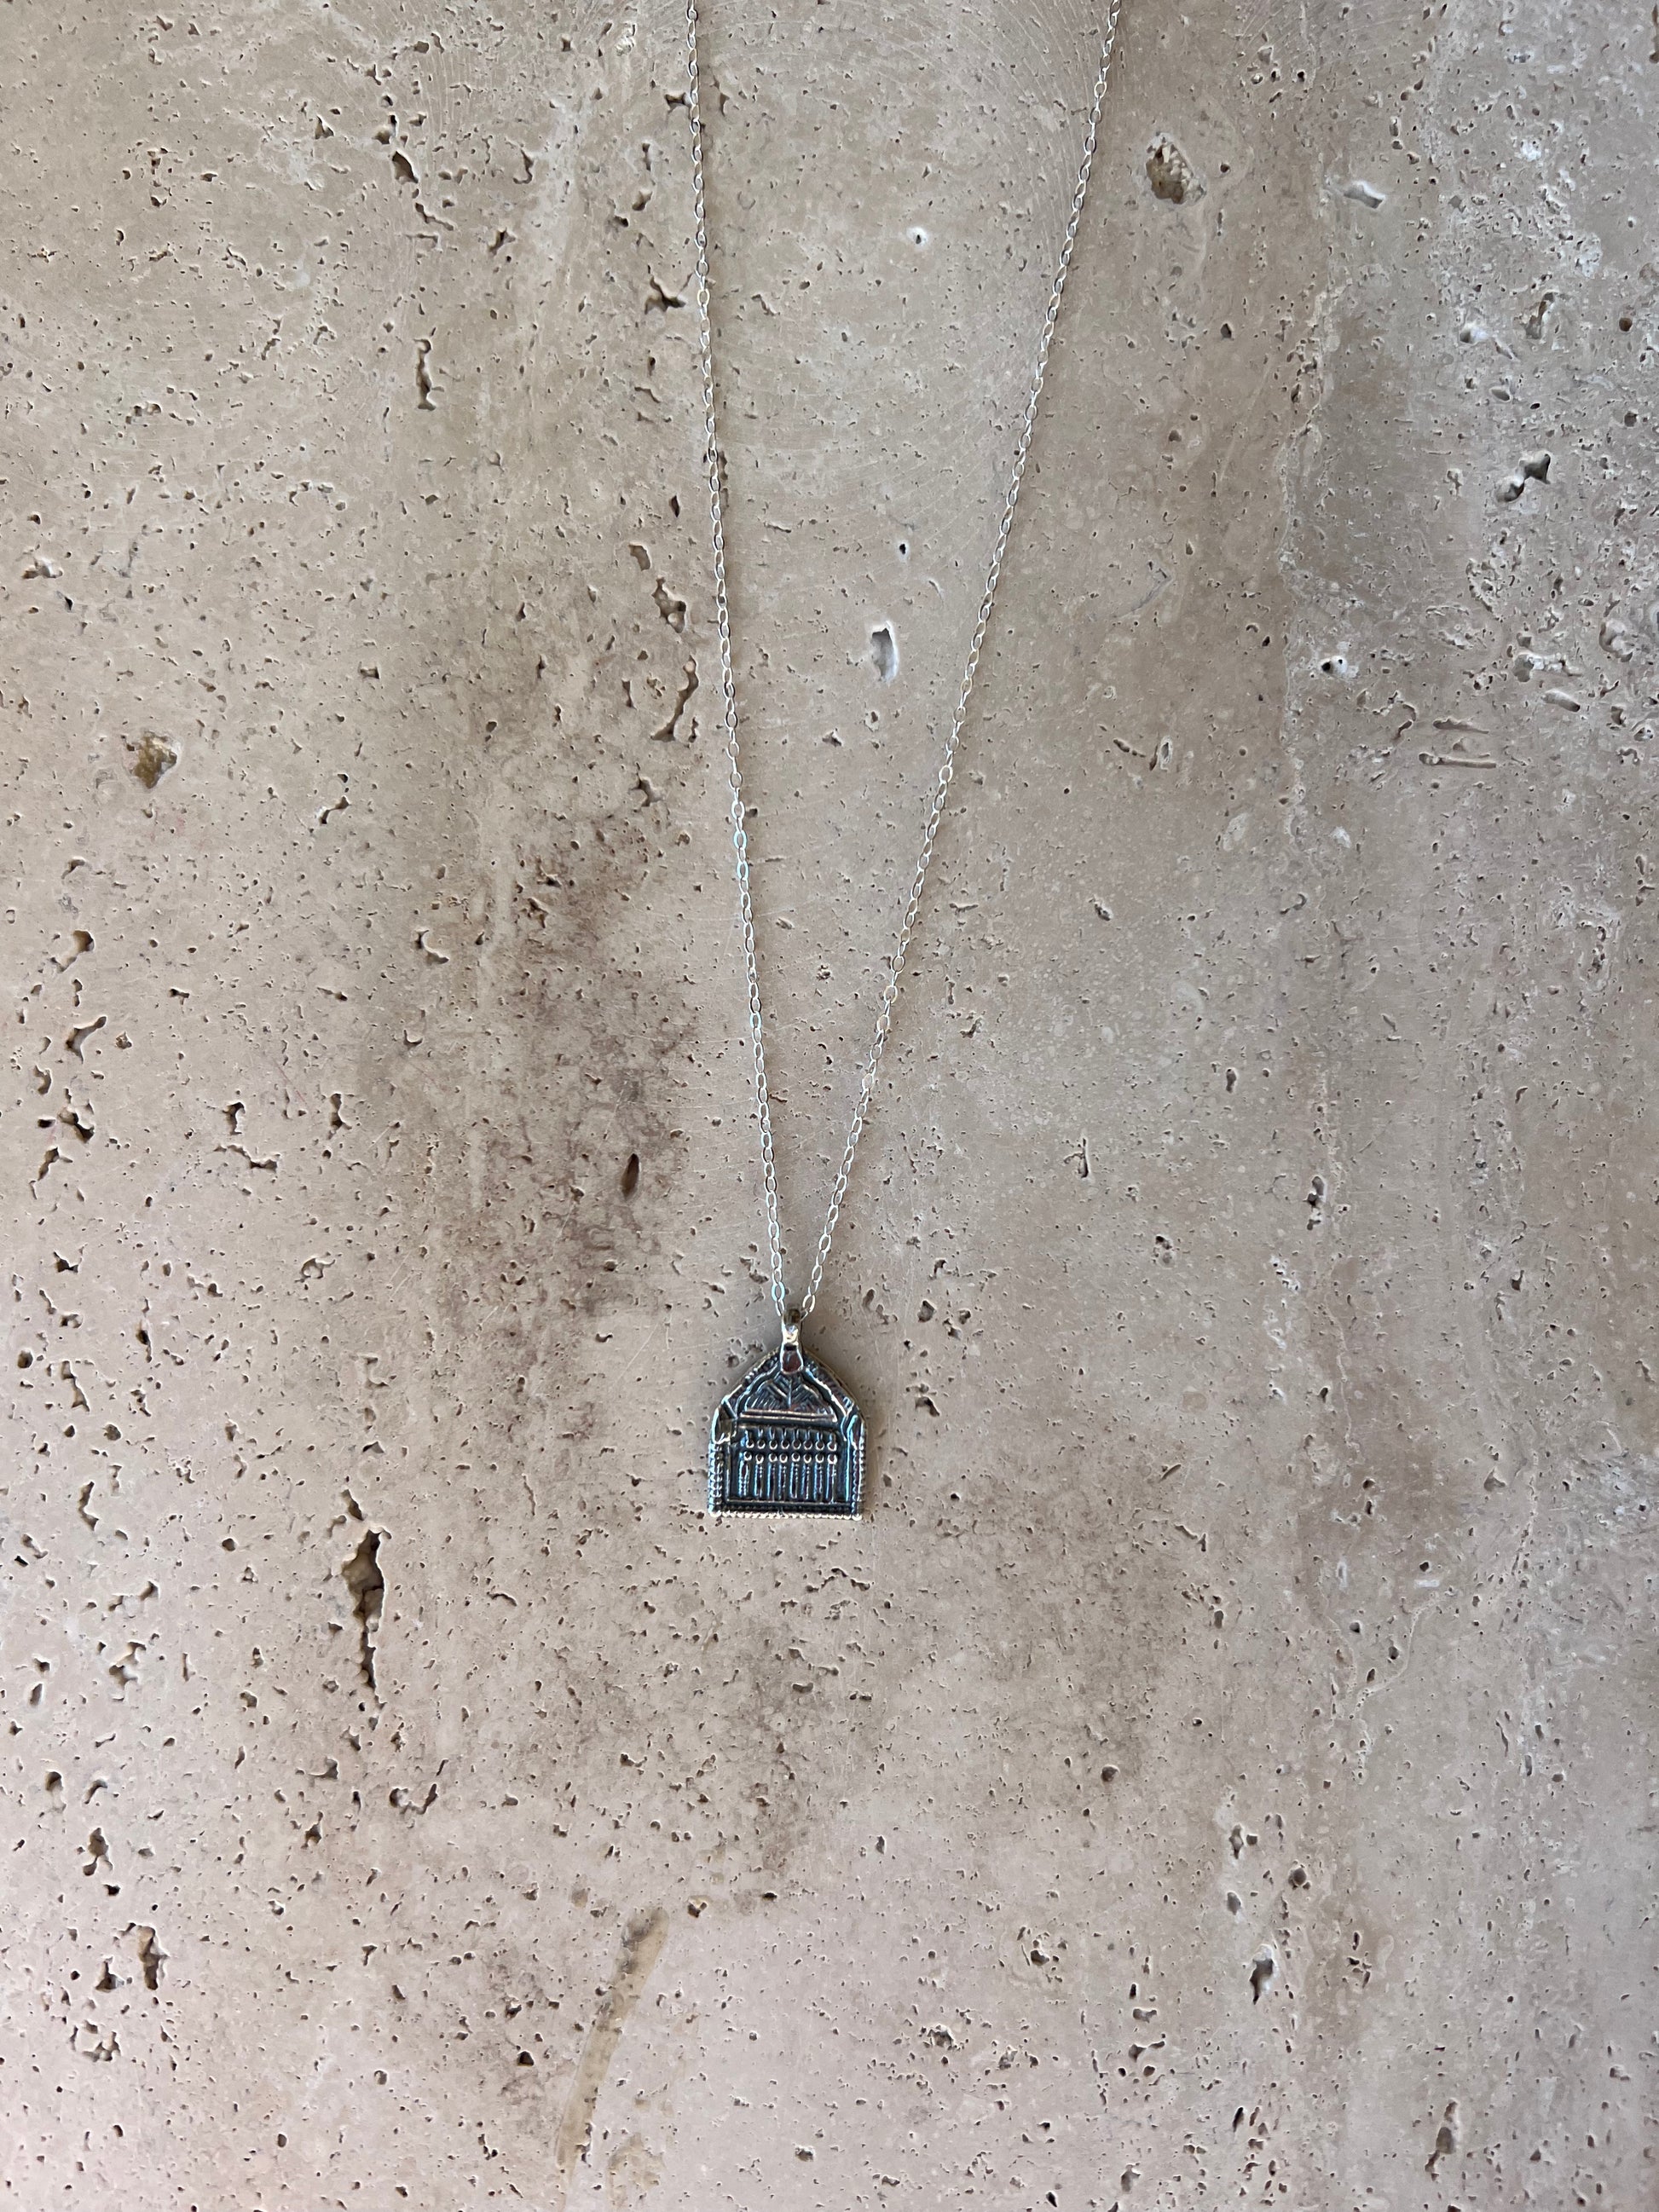 Delicate light weight hand carved charm necklace designed to represent a door, passageway or opportunity. Recycled brass pendant coated in a thick layer of high grade 14k gold or sterling silver. Handmade in the Santa Cruz Mountains.